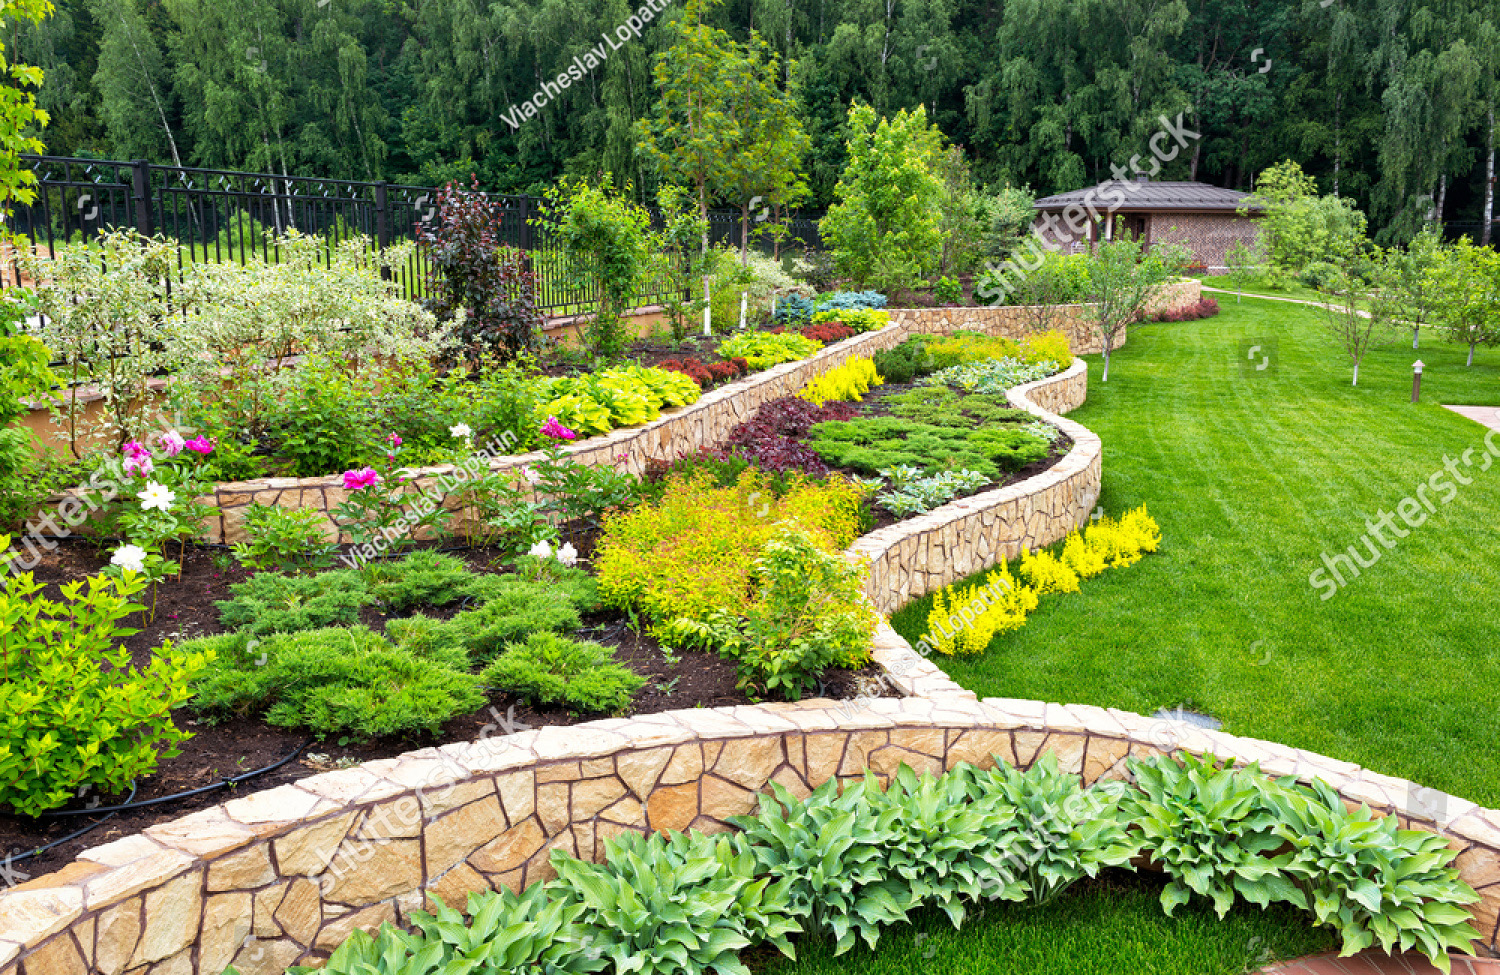 stock-photo-natural-landscaping-panorama-in-home-garden-beautiful-view-of-nice-landscaped-garden-in-backyard-639534952